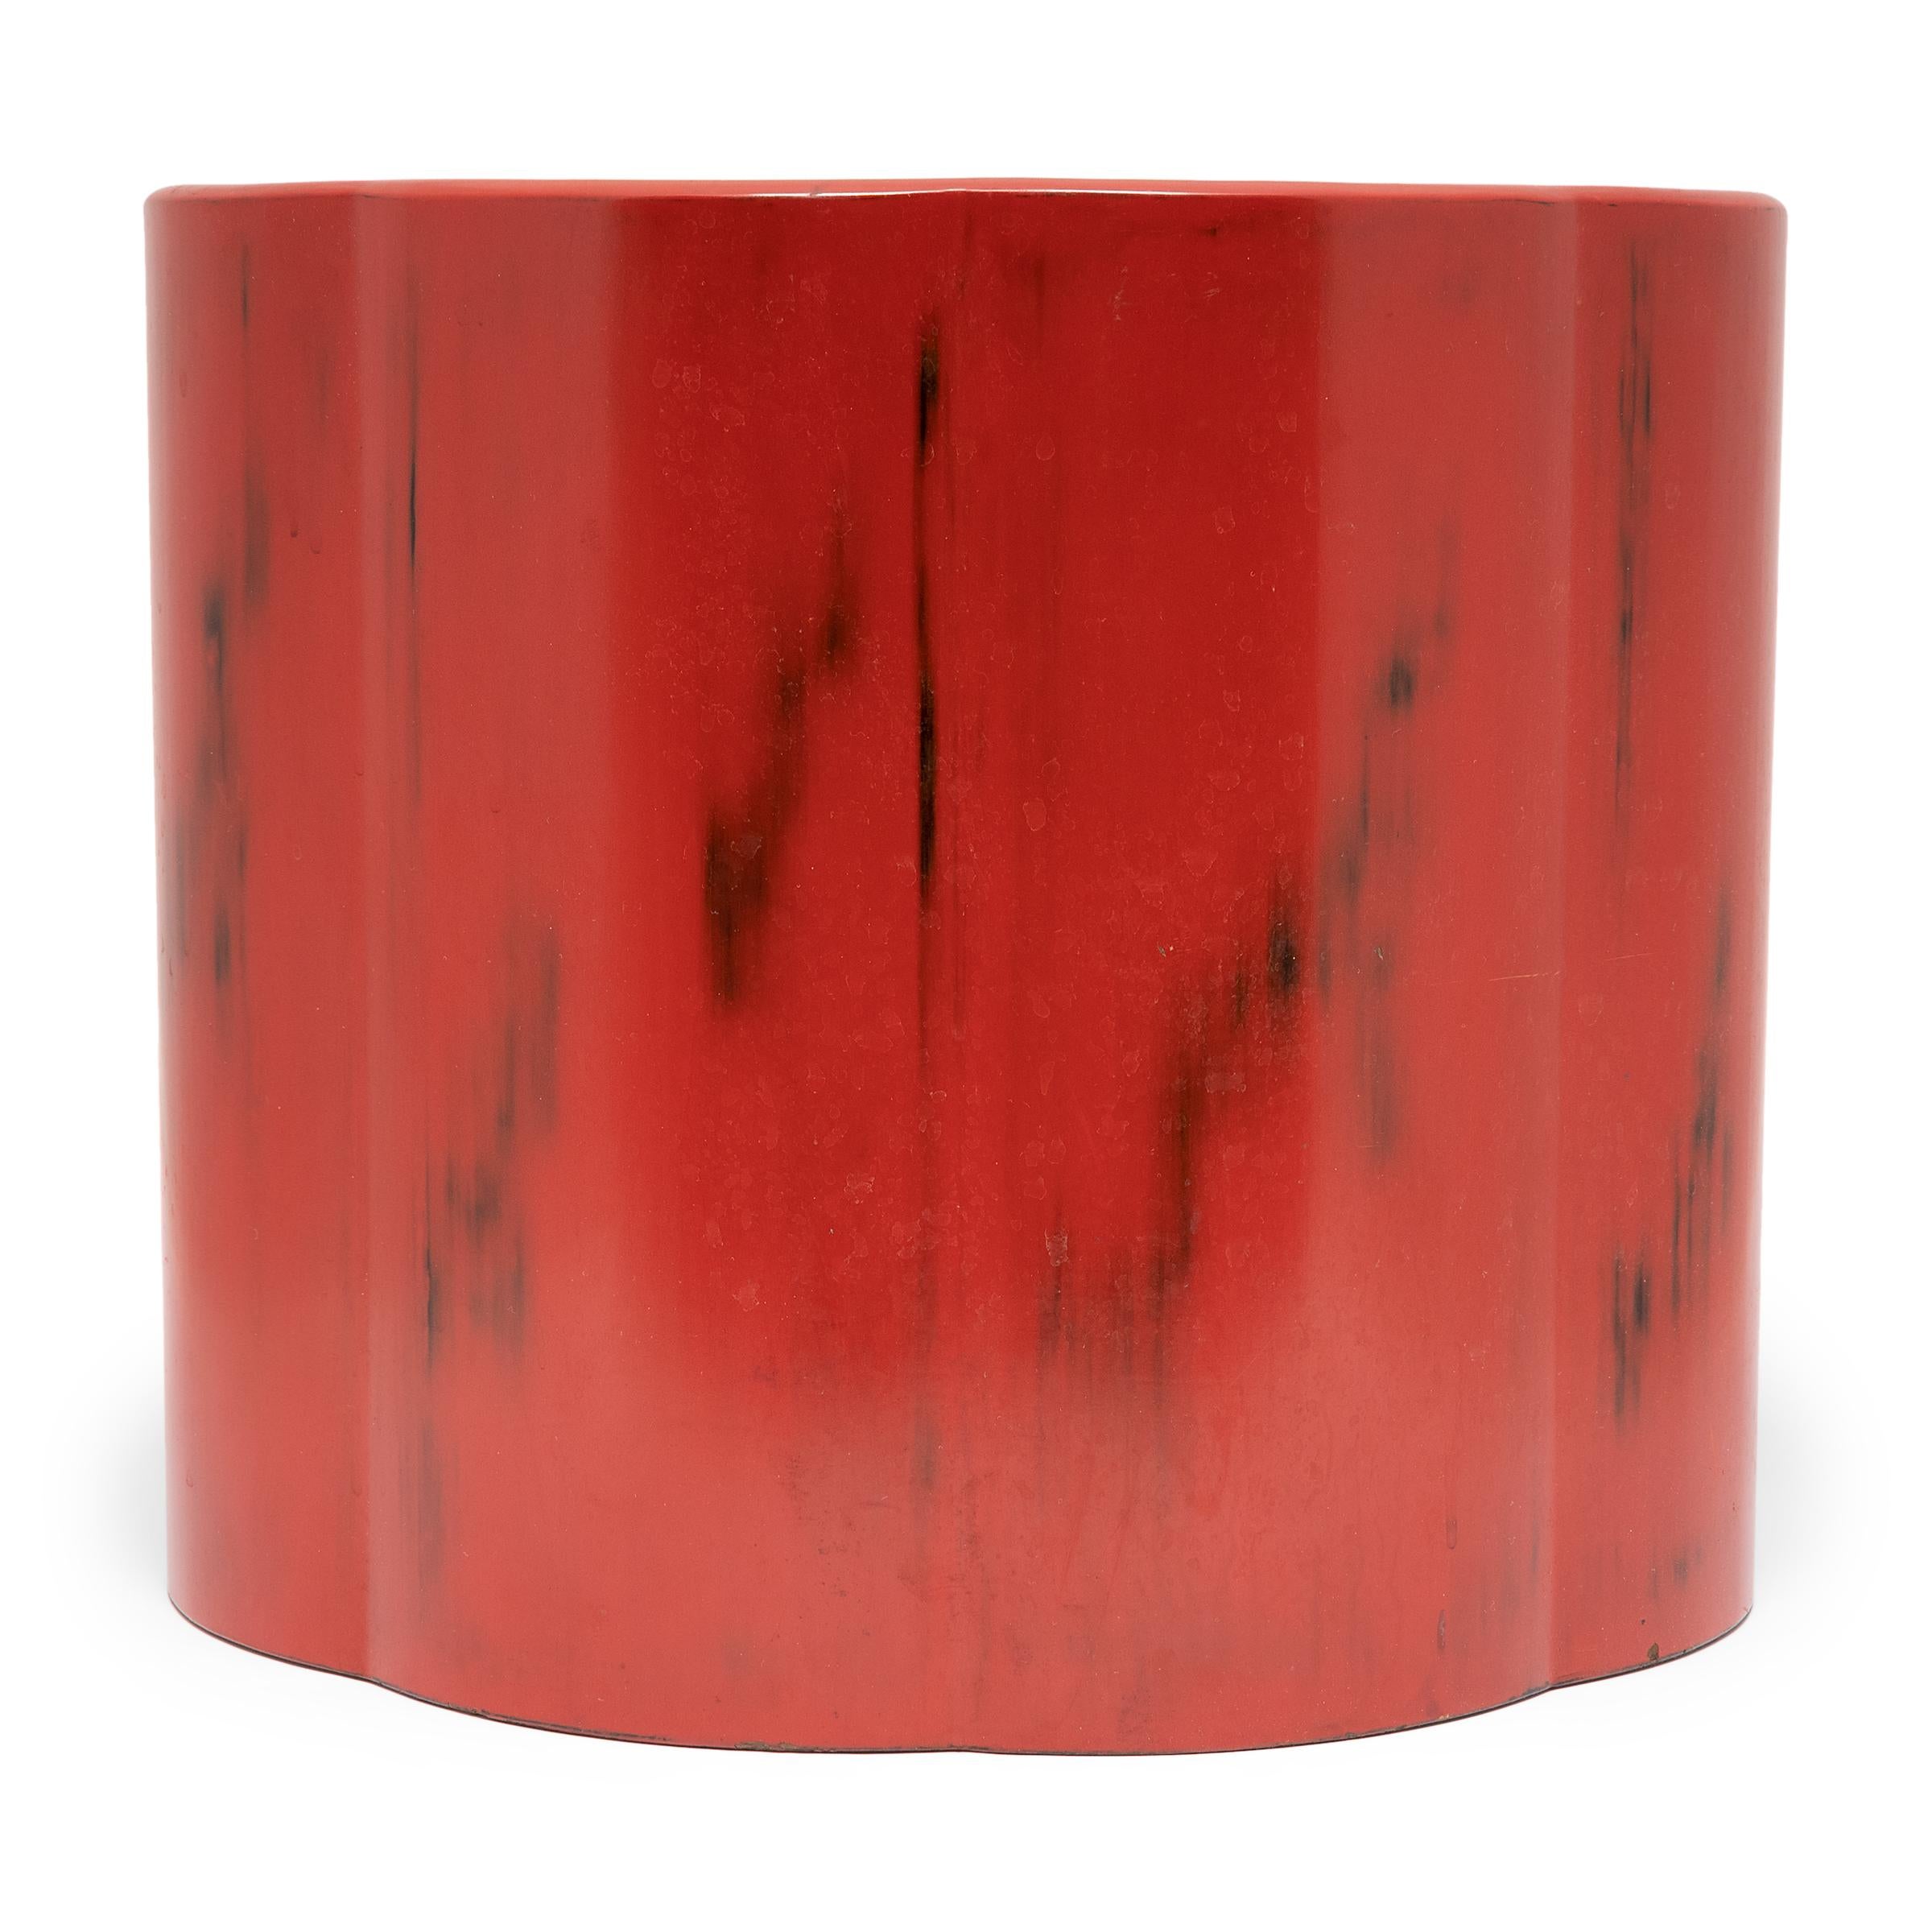 20th Century Japanese Red Lacquer Hibachi, c. 1900 For Sale